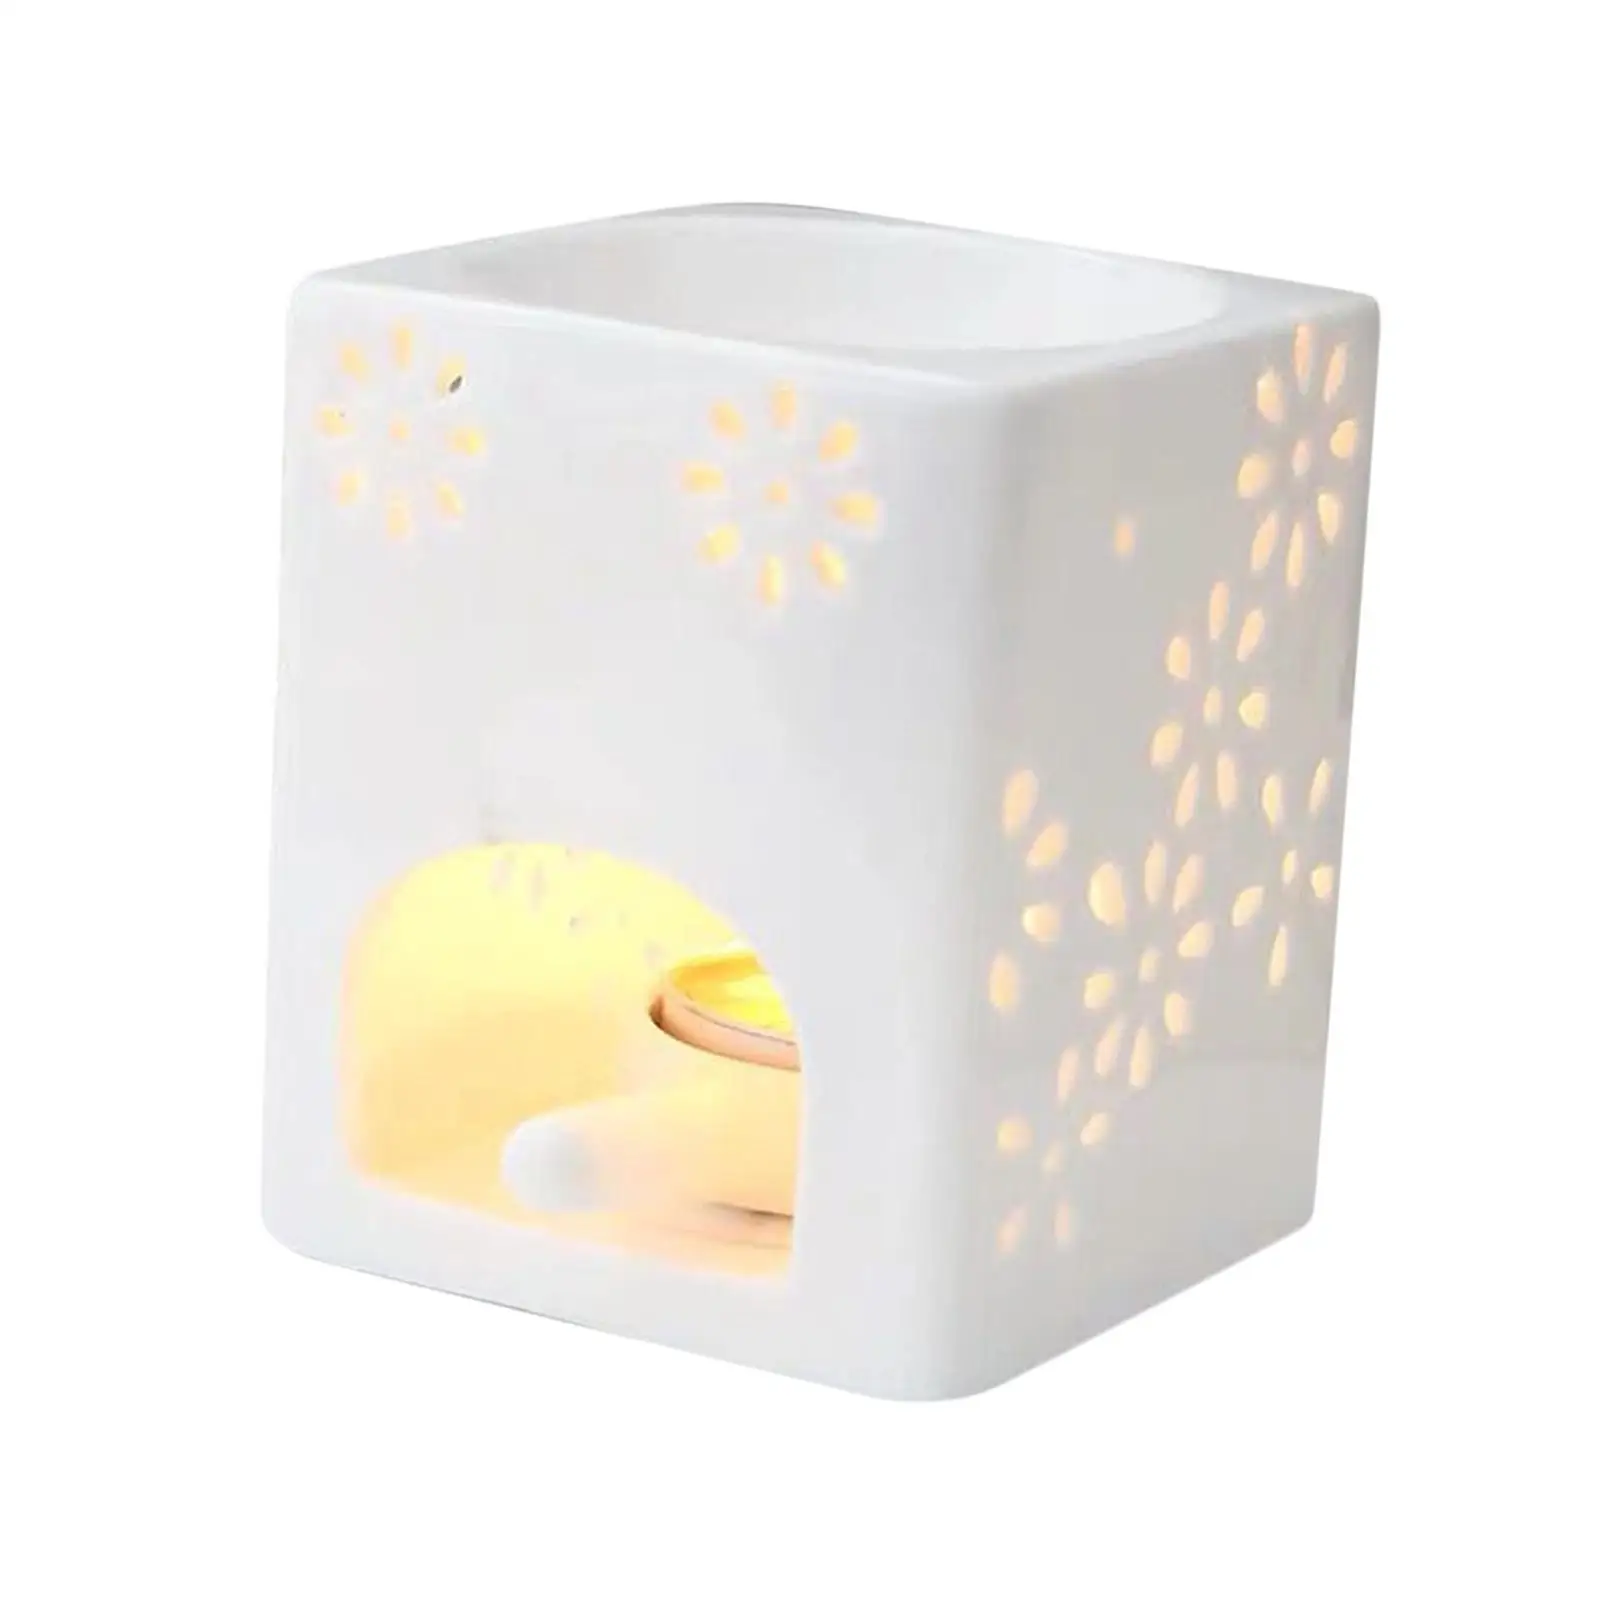 Ceramic Tea Light Holder White Essential Oil Burner Candle  Top with Bowl for  Meditation Home Relaxation